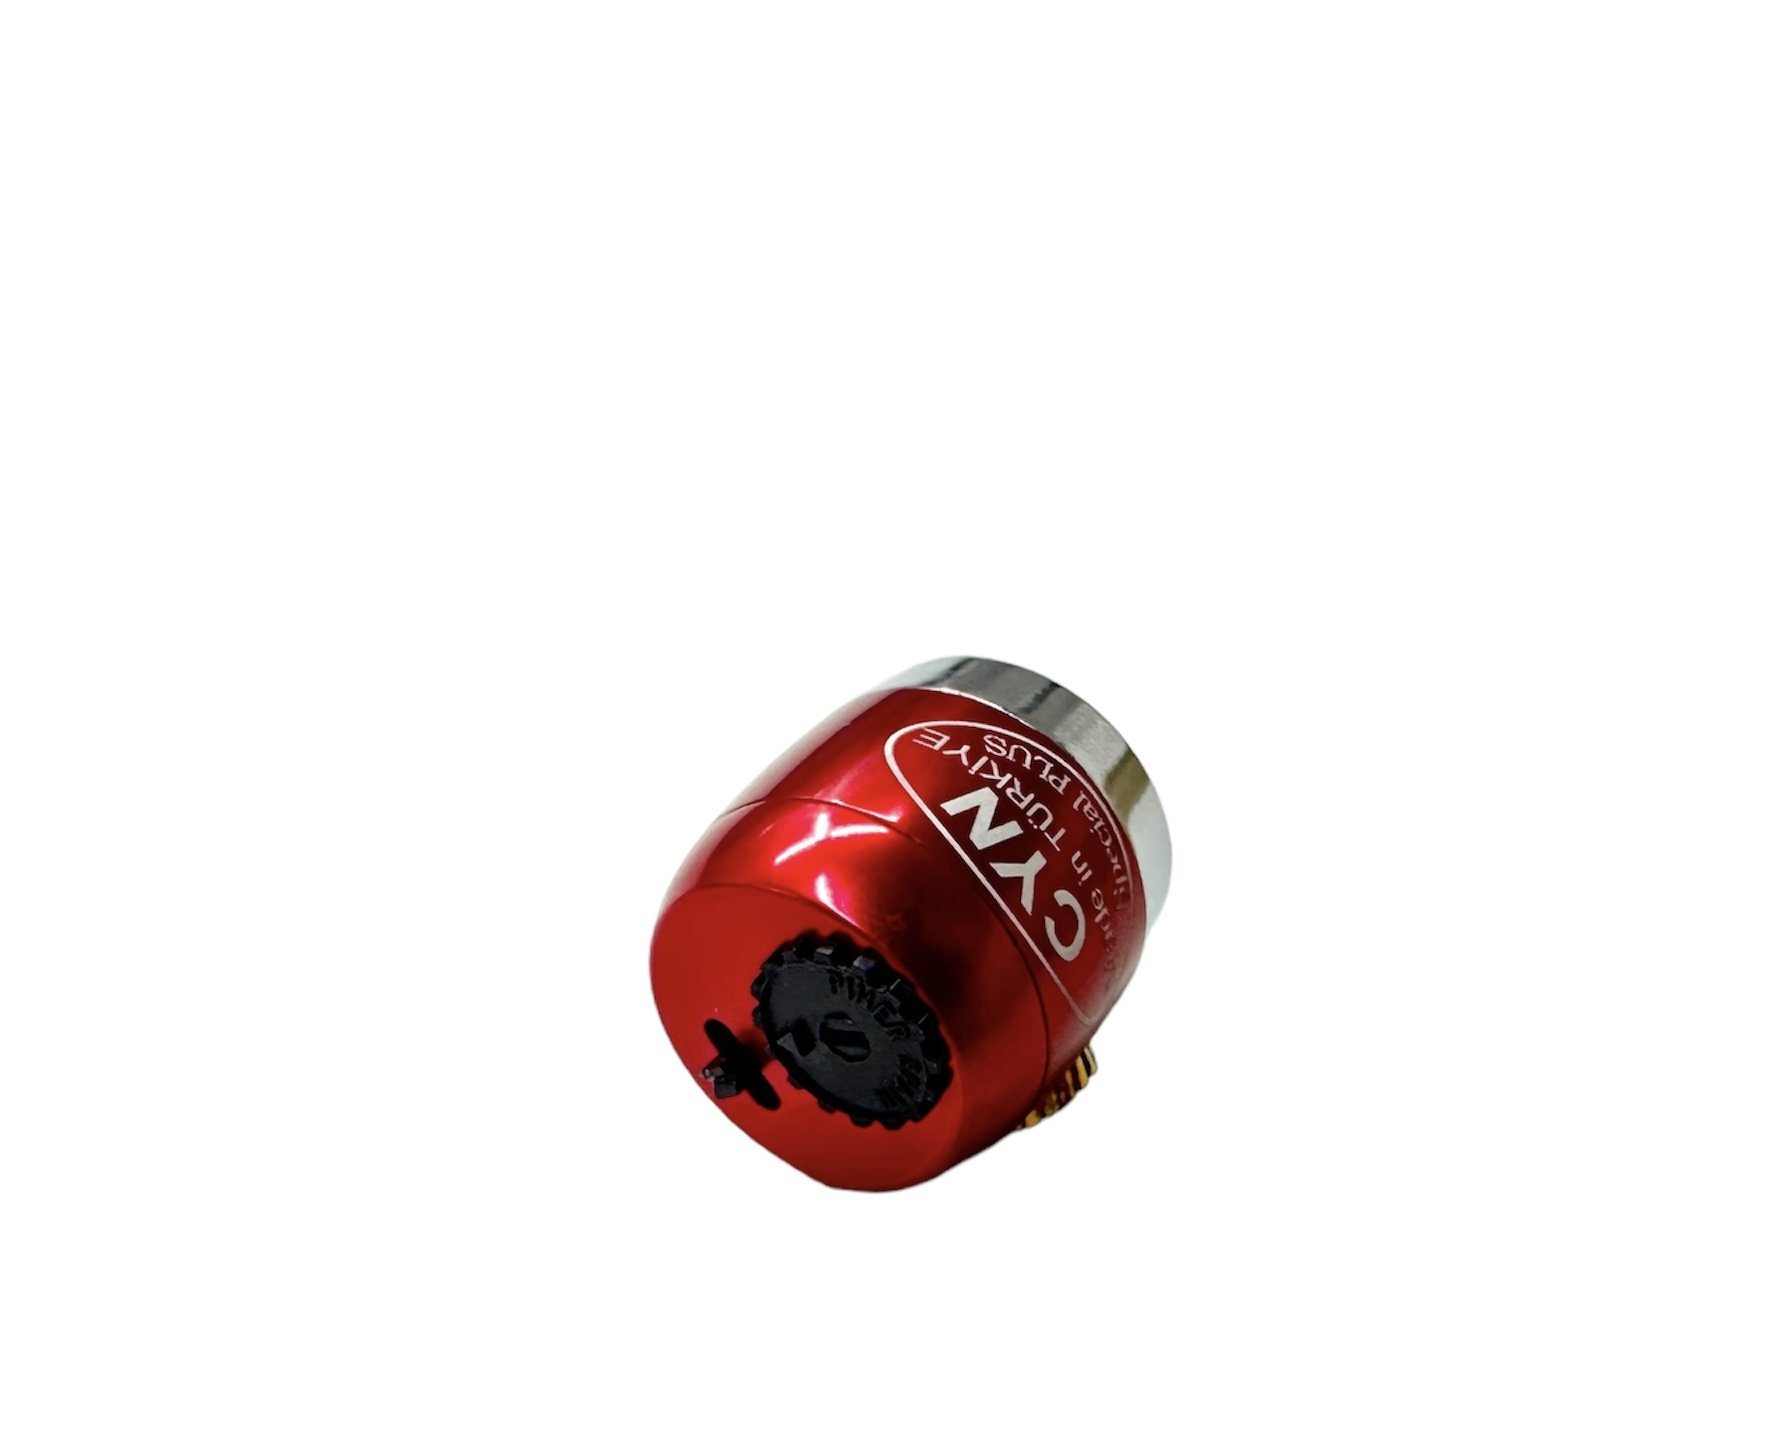 CYN CLARNET MICROPHONE SPECIAL PLUS MODEL-RED COLOR